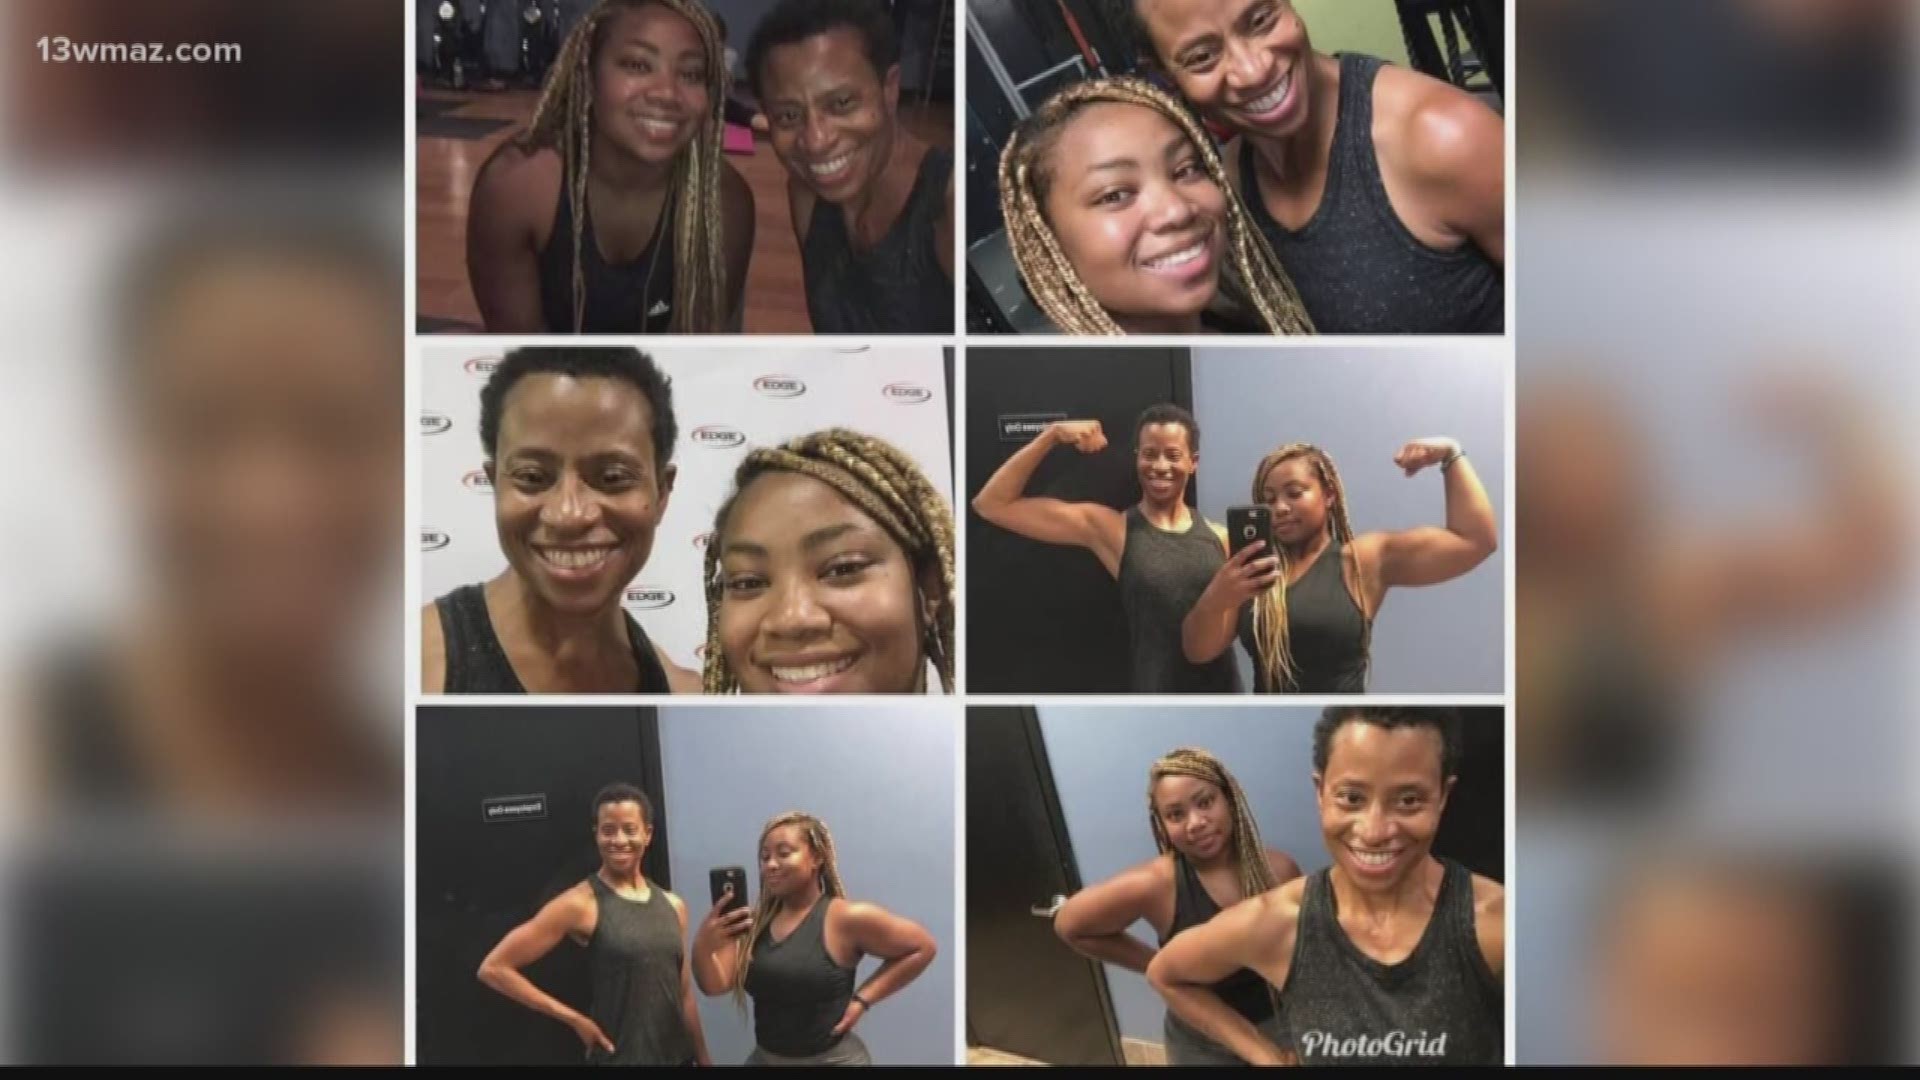 Charmette Rivers is a self-proclaimed gym rat, jumping at every opportunity she can get to work on her health and fitness even if the doors of the gym are closed.